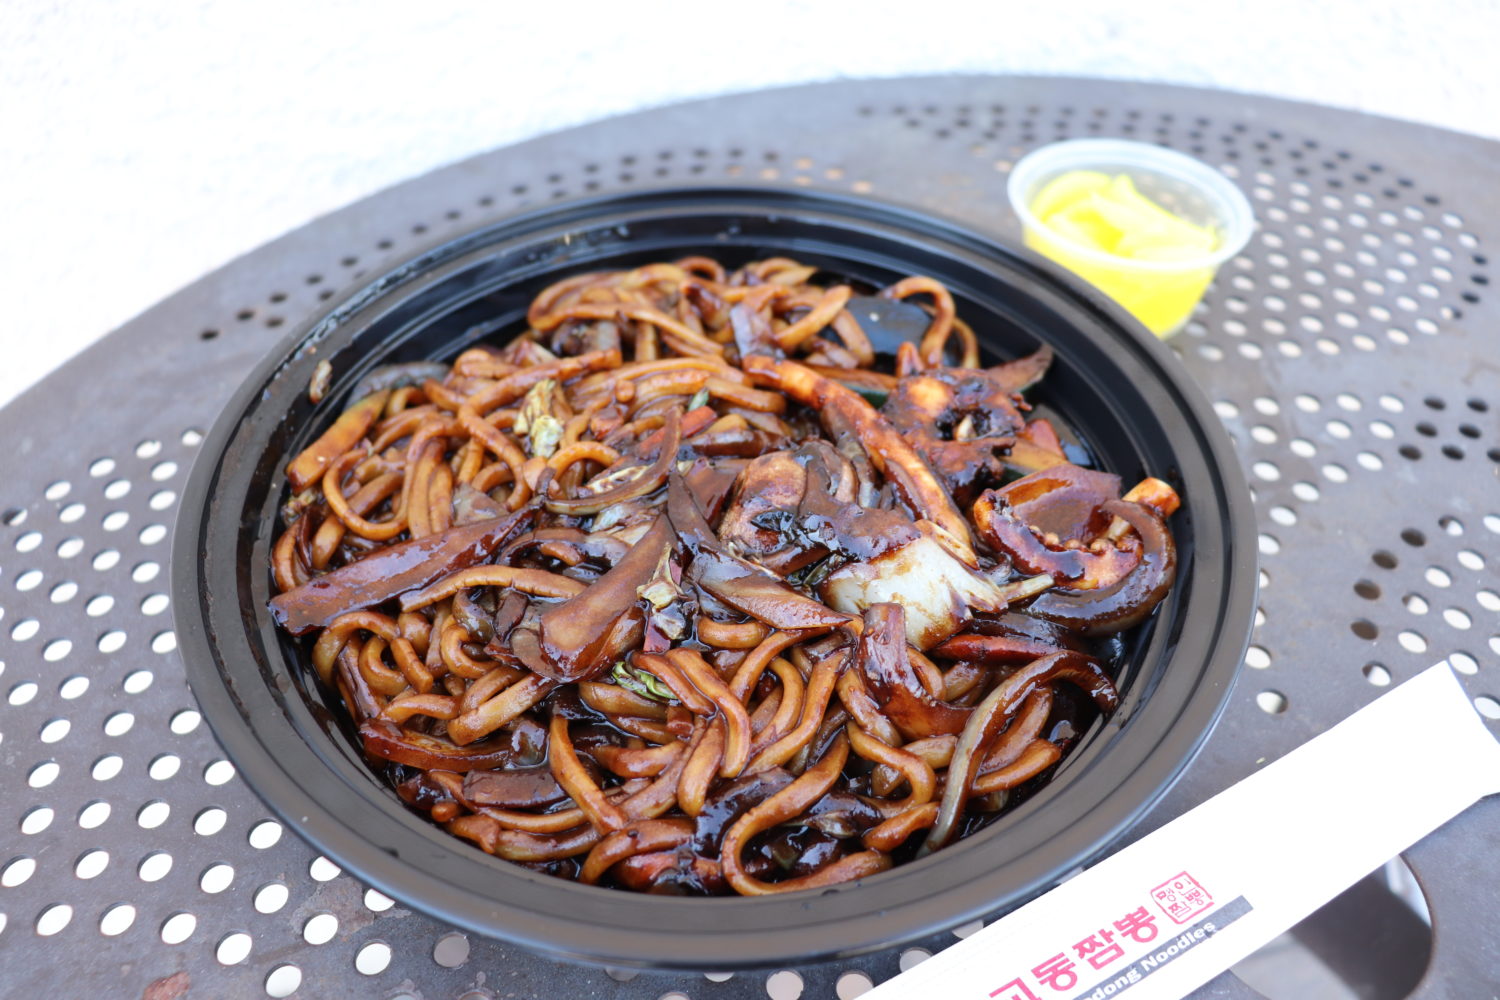 Kyodang Noodles: Irvine's New Hub for Jajangmyeon Delights